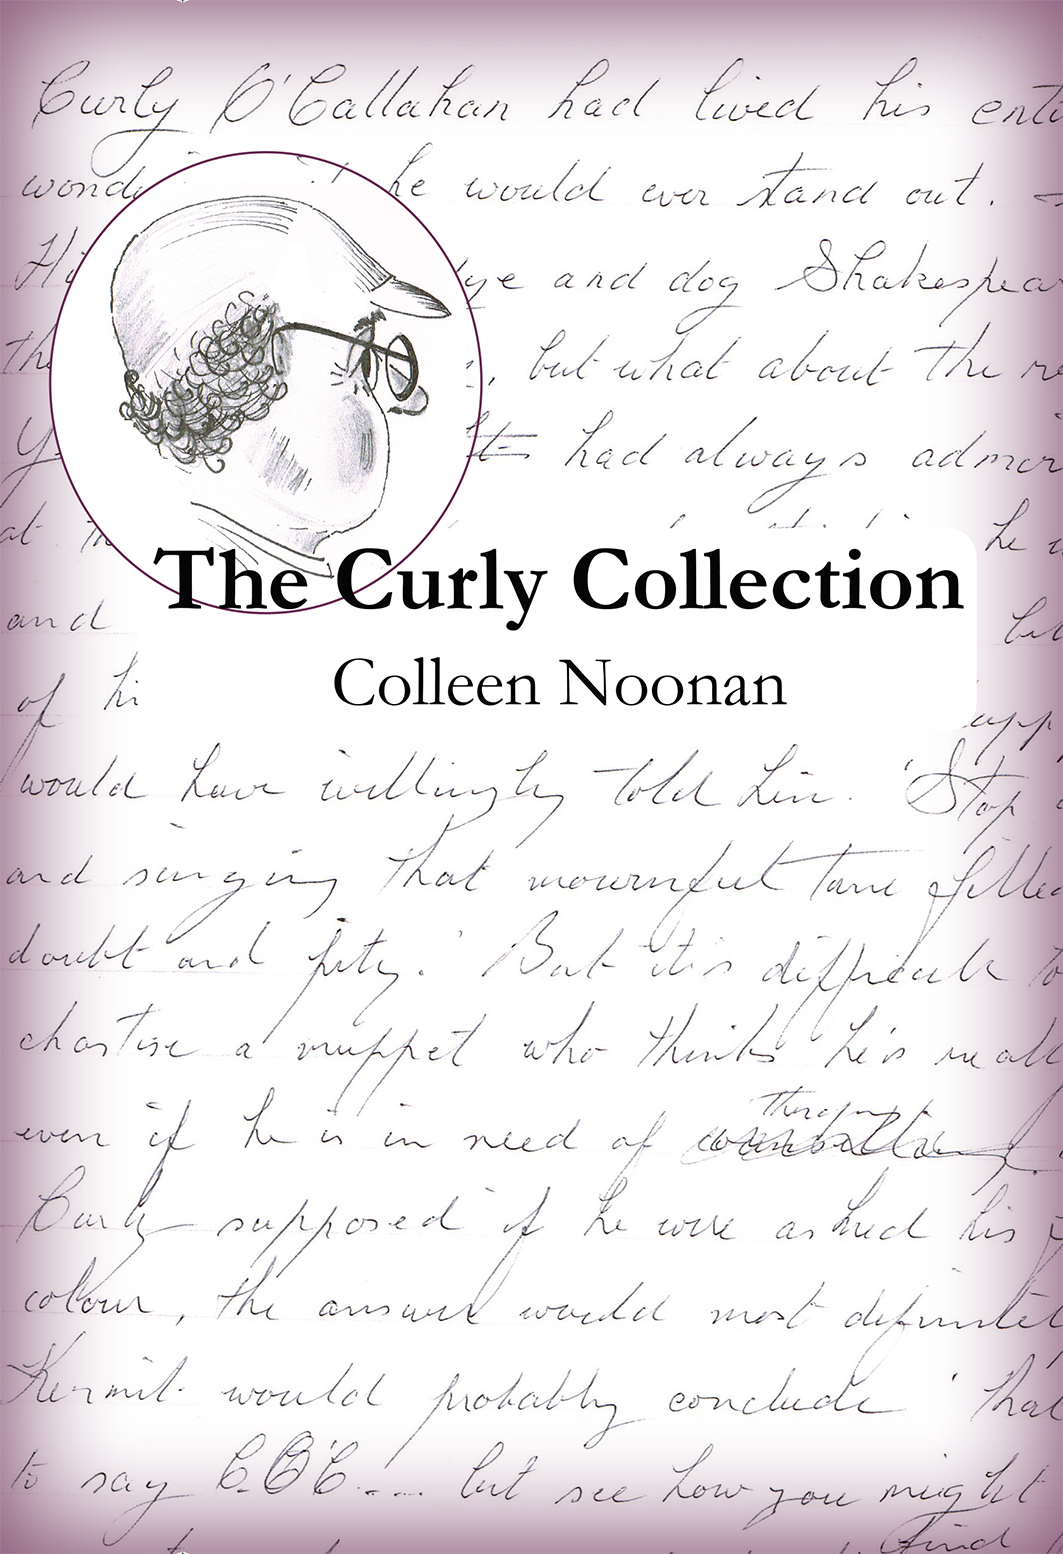 The Curly Collection